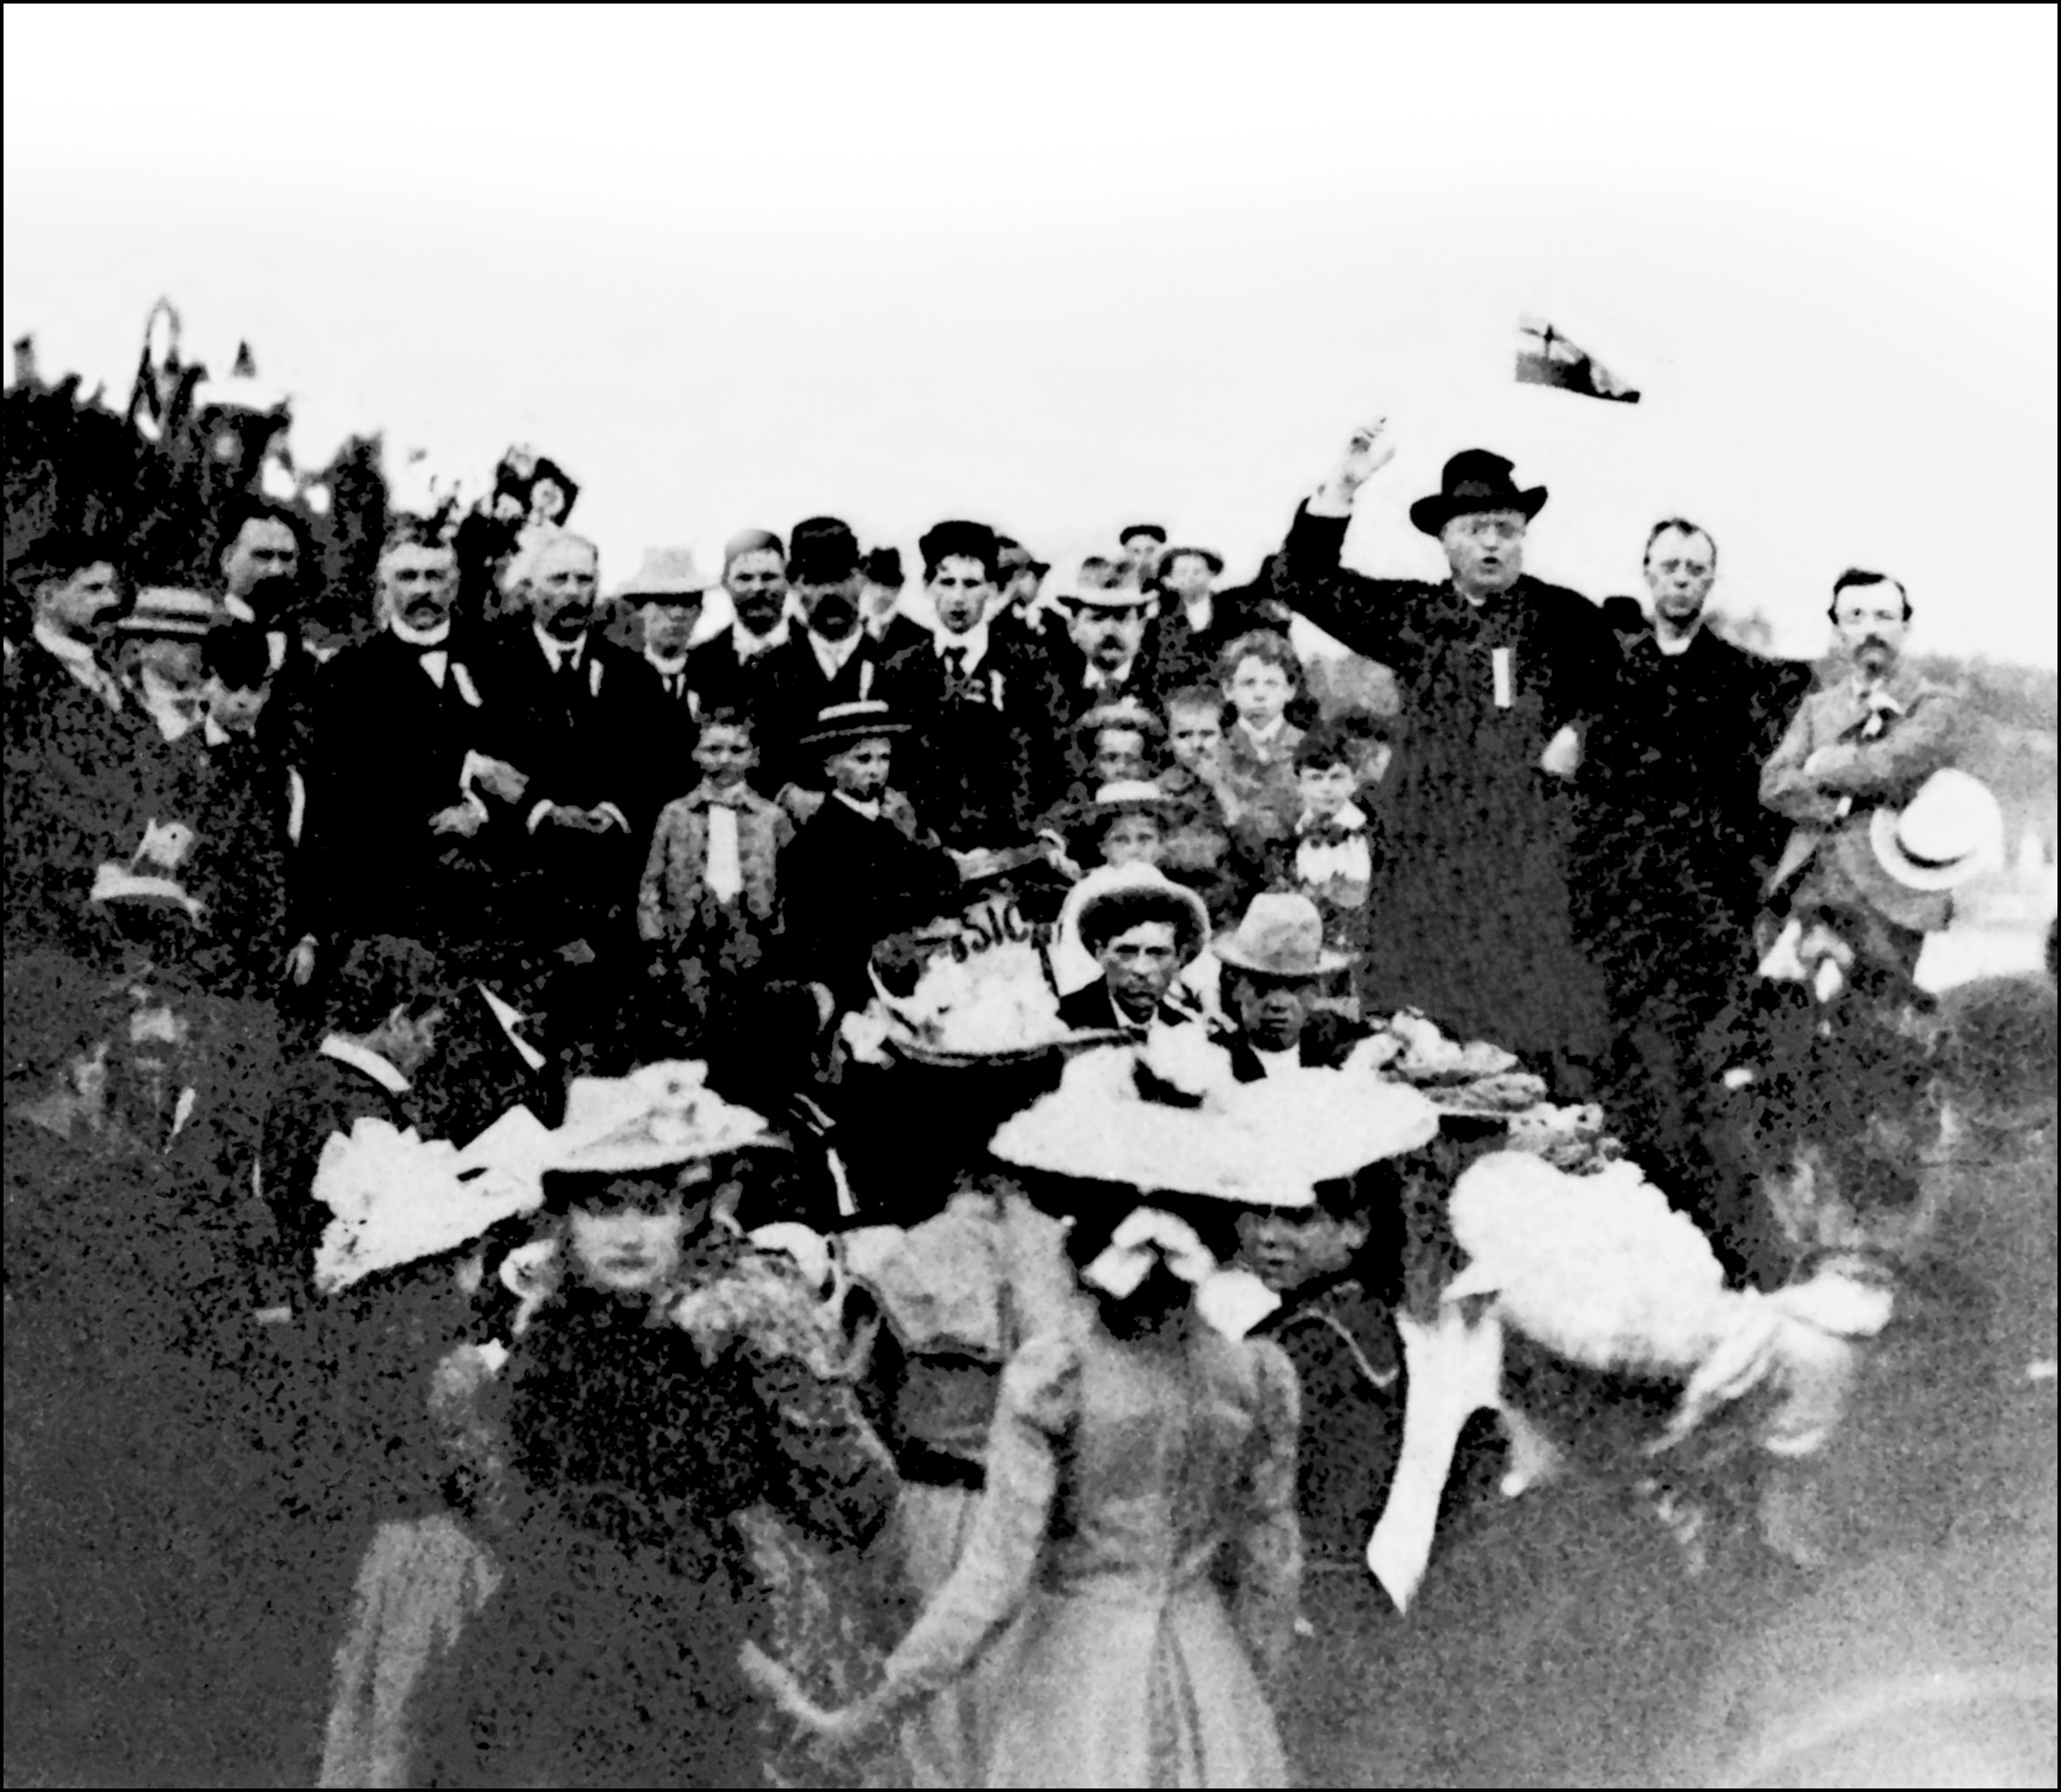 Black & white photograph of a crowd outdoors, surrounding an imposing figure, Curé Antoine Labelle. Several men are seen, along with a few women and children, all well dressed. Labelle wears a black cassock and black hat and is giving a speech; his mouth is open and his right arm is raised beside his head. His left art rests on his hip.